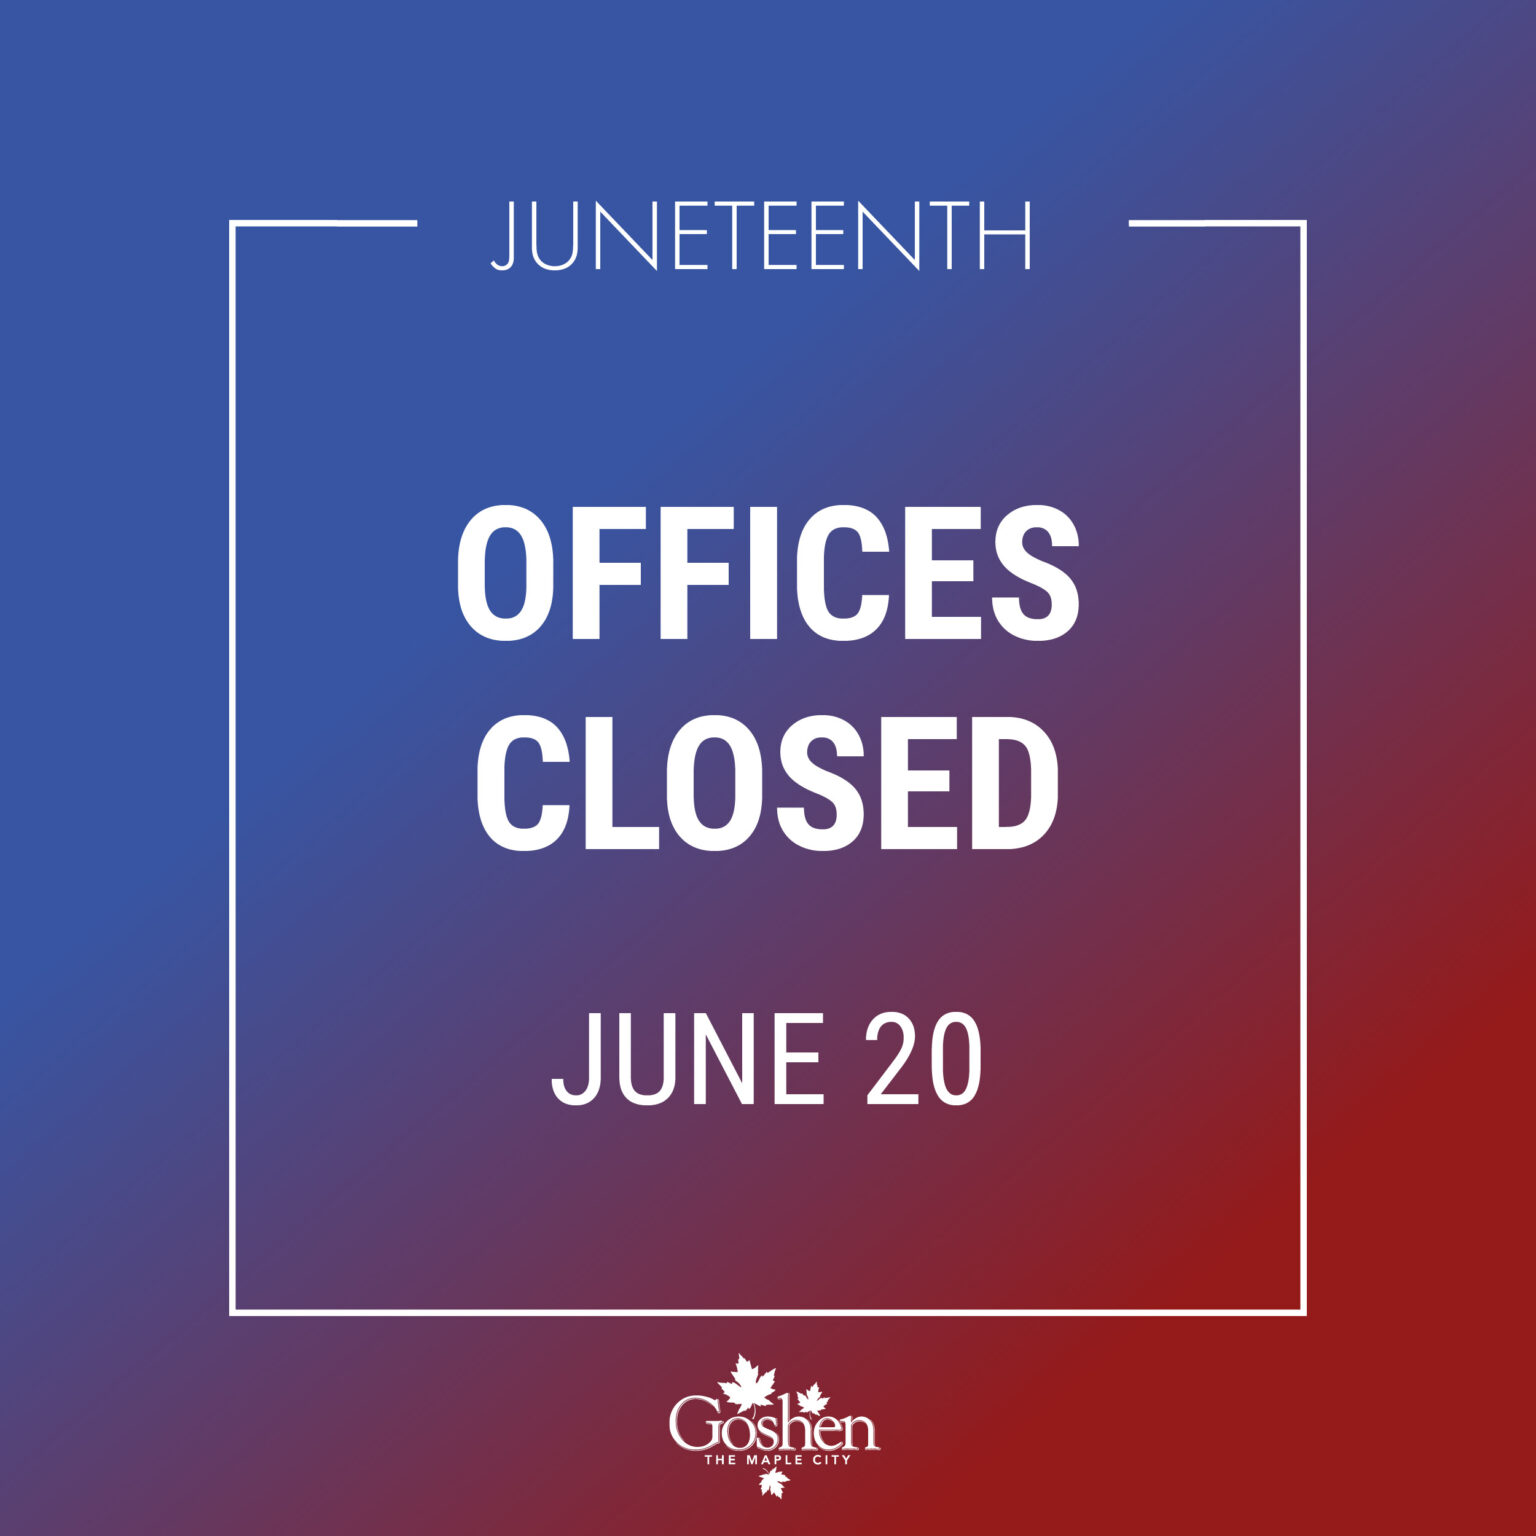 CITY OFFICES CLOSED News